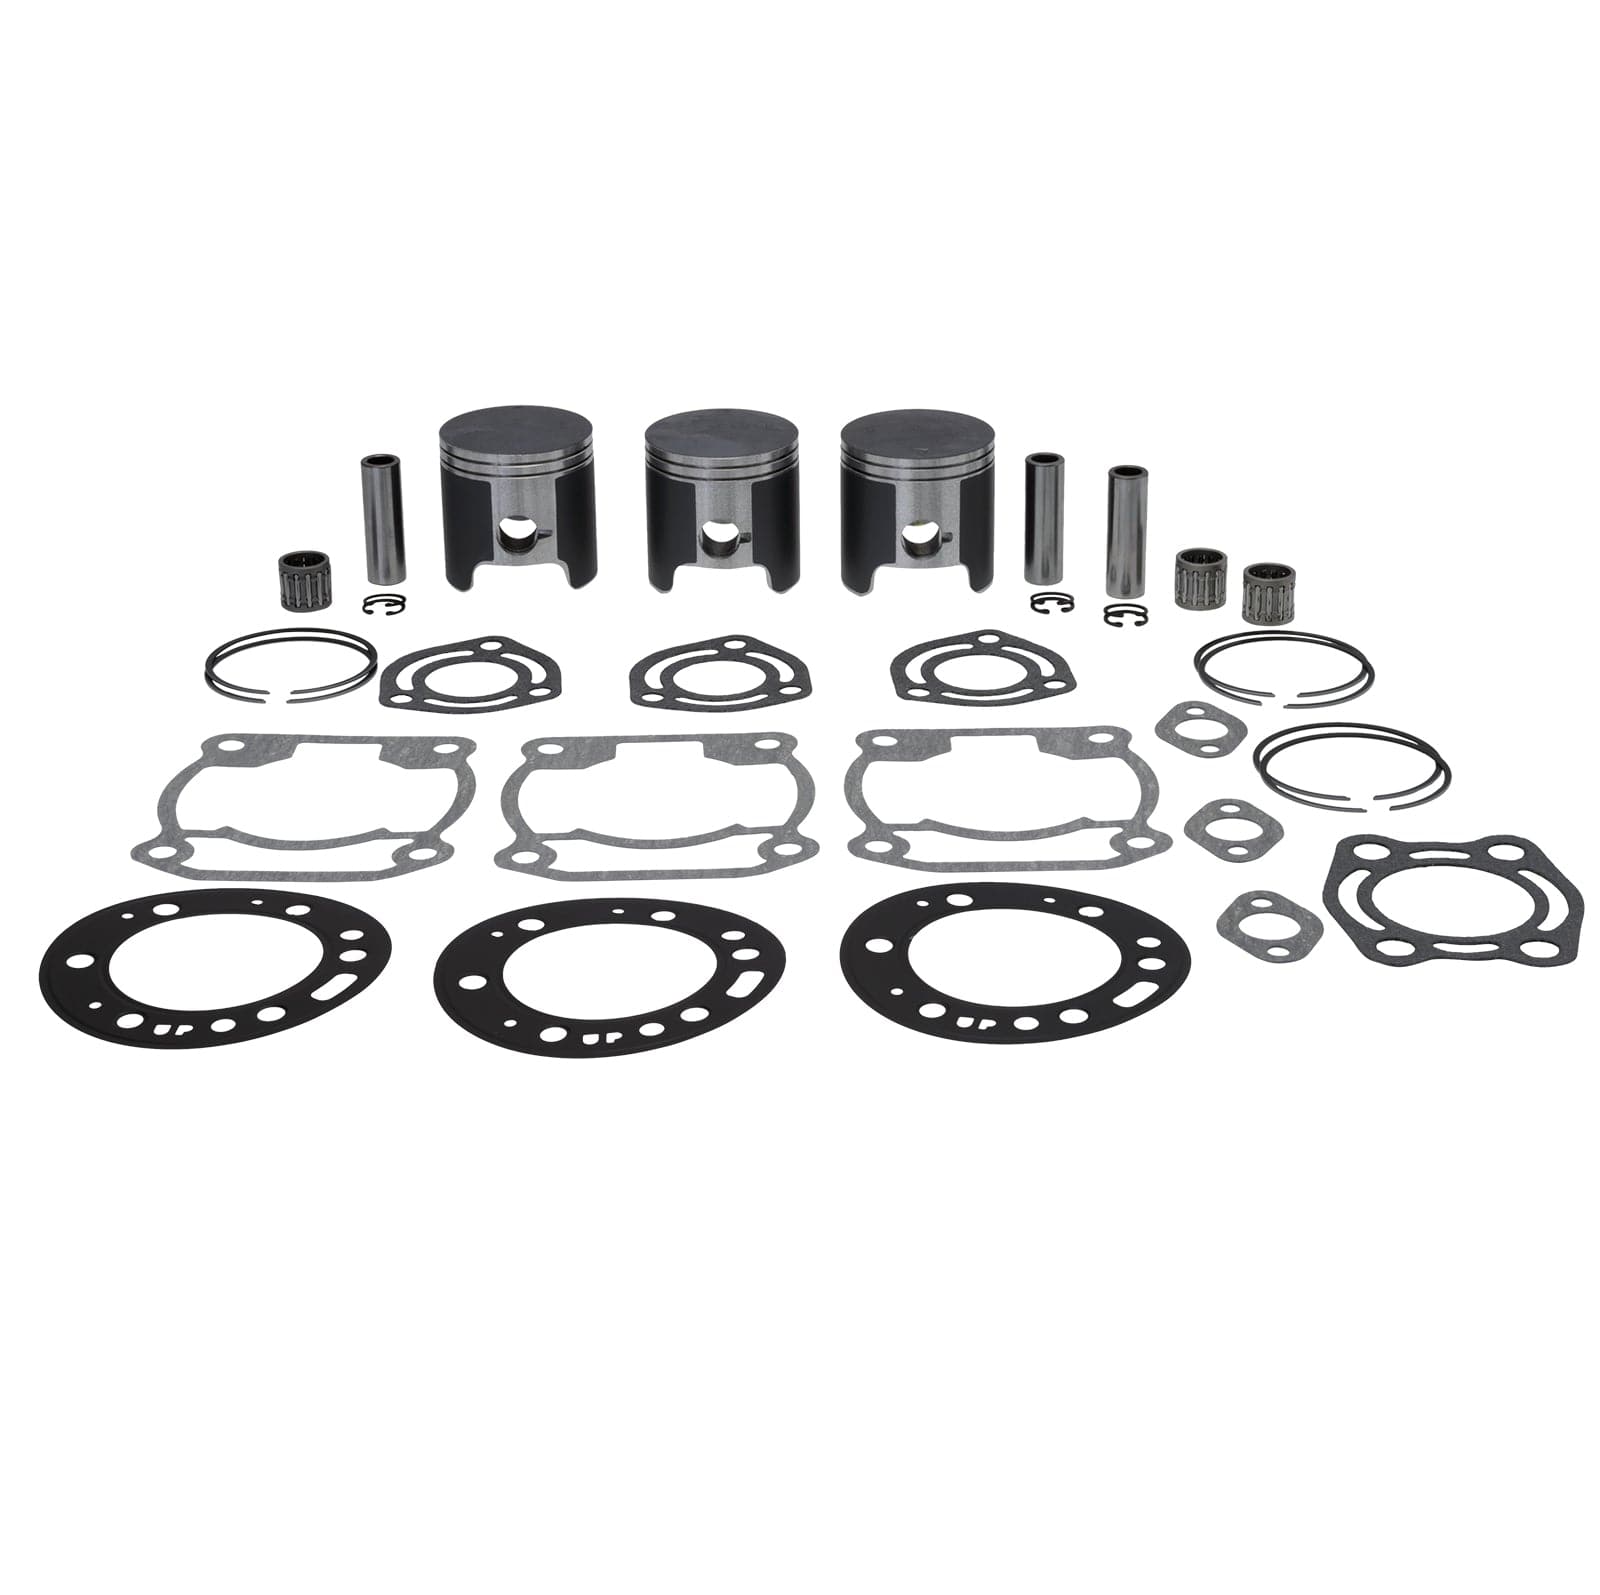 Top End Rebuild Kits for Jet Skis | Watercraft Superstore